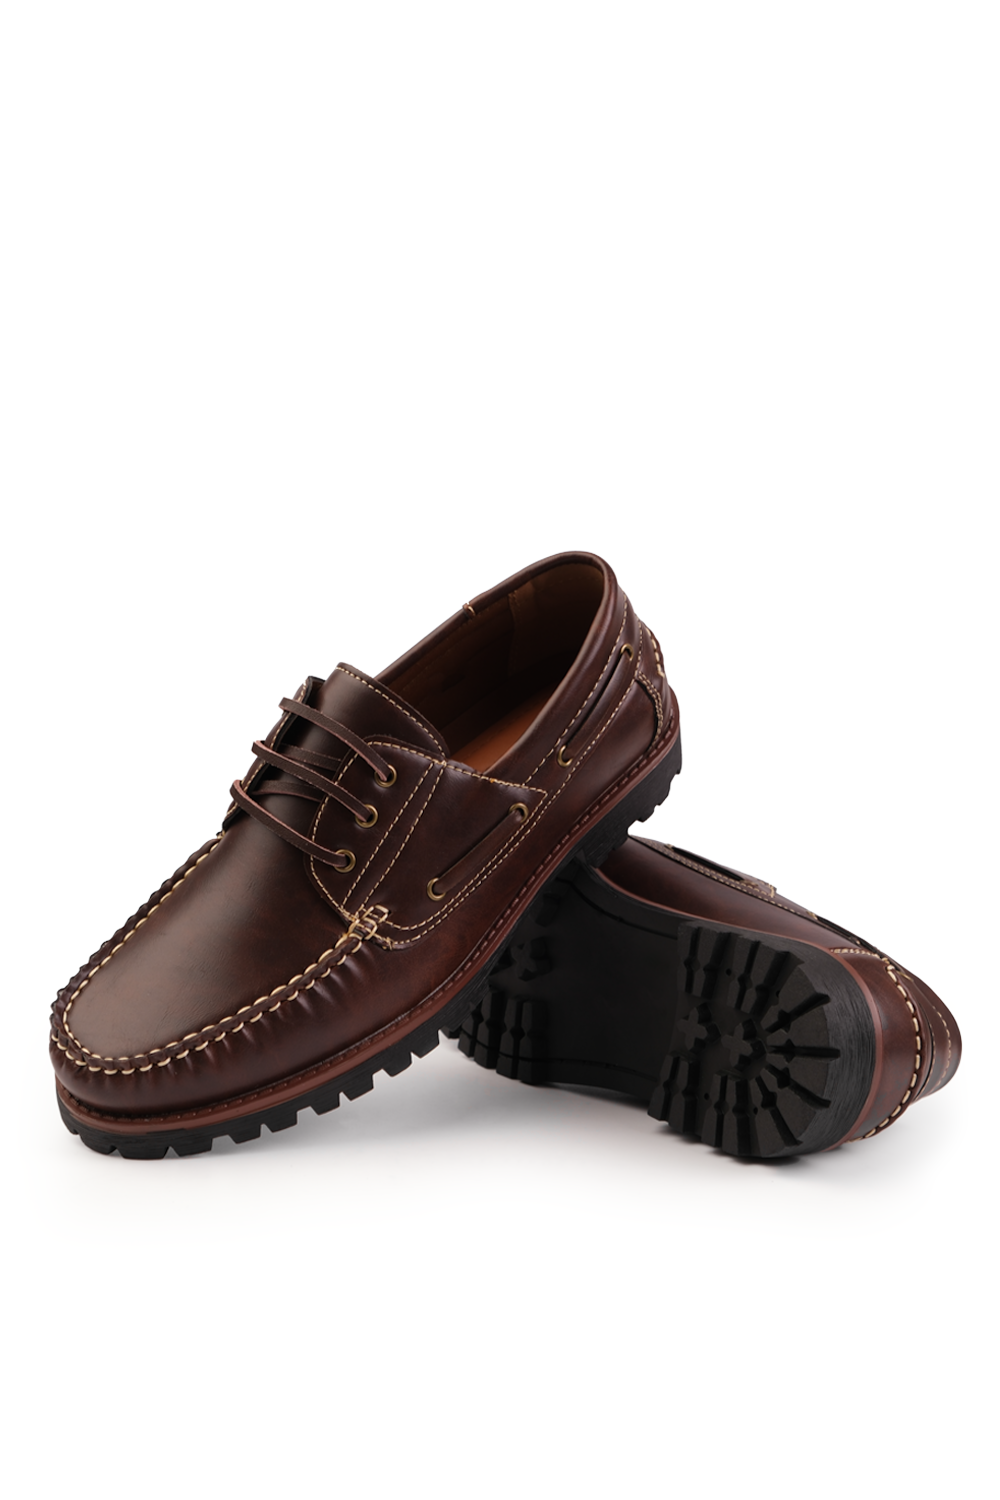 ISAAC CHUNKY BOAT SHOES IN BROWN